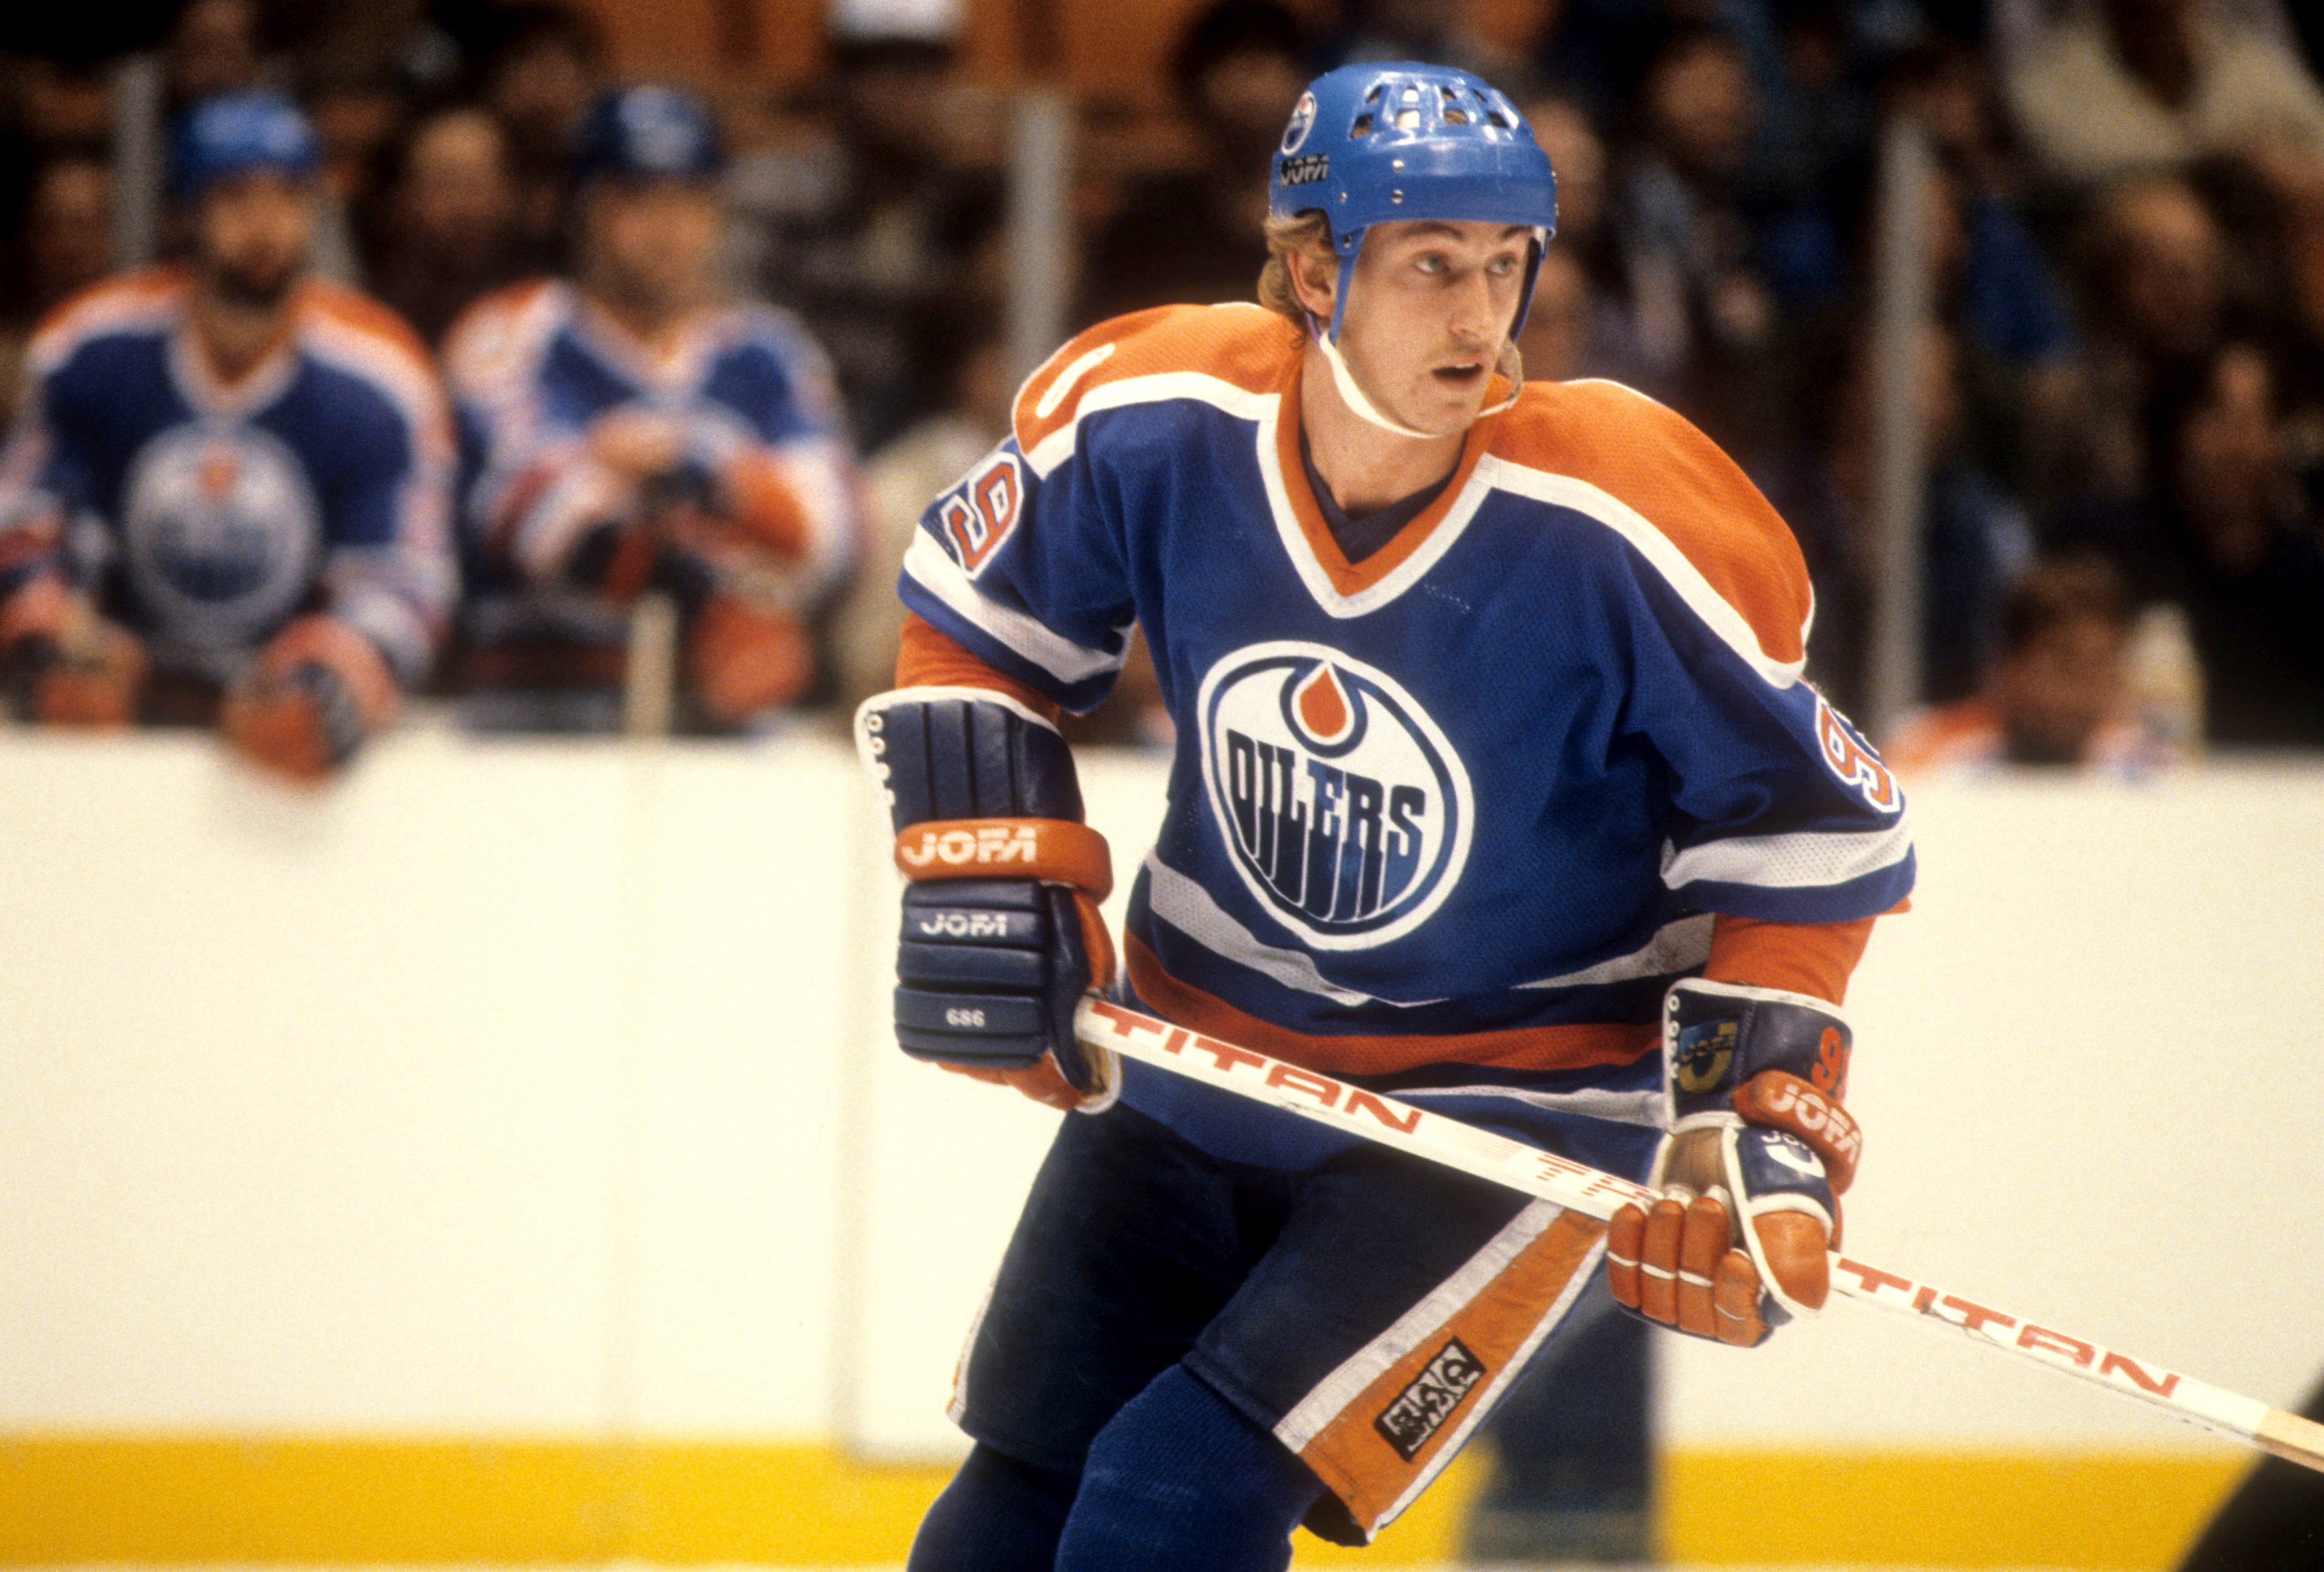 Wayne Gretzky is so far above every player in NHL history that he would still be the all-time points leader if he never even scored one goal.